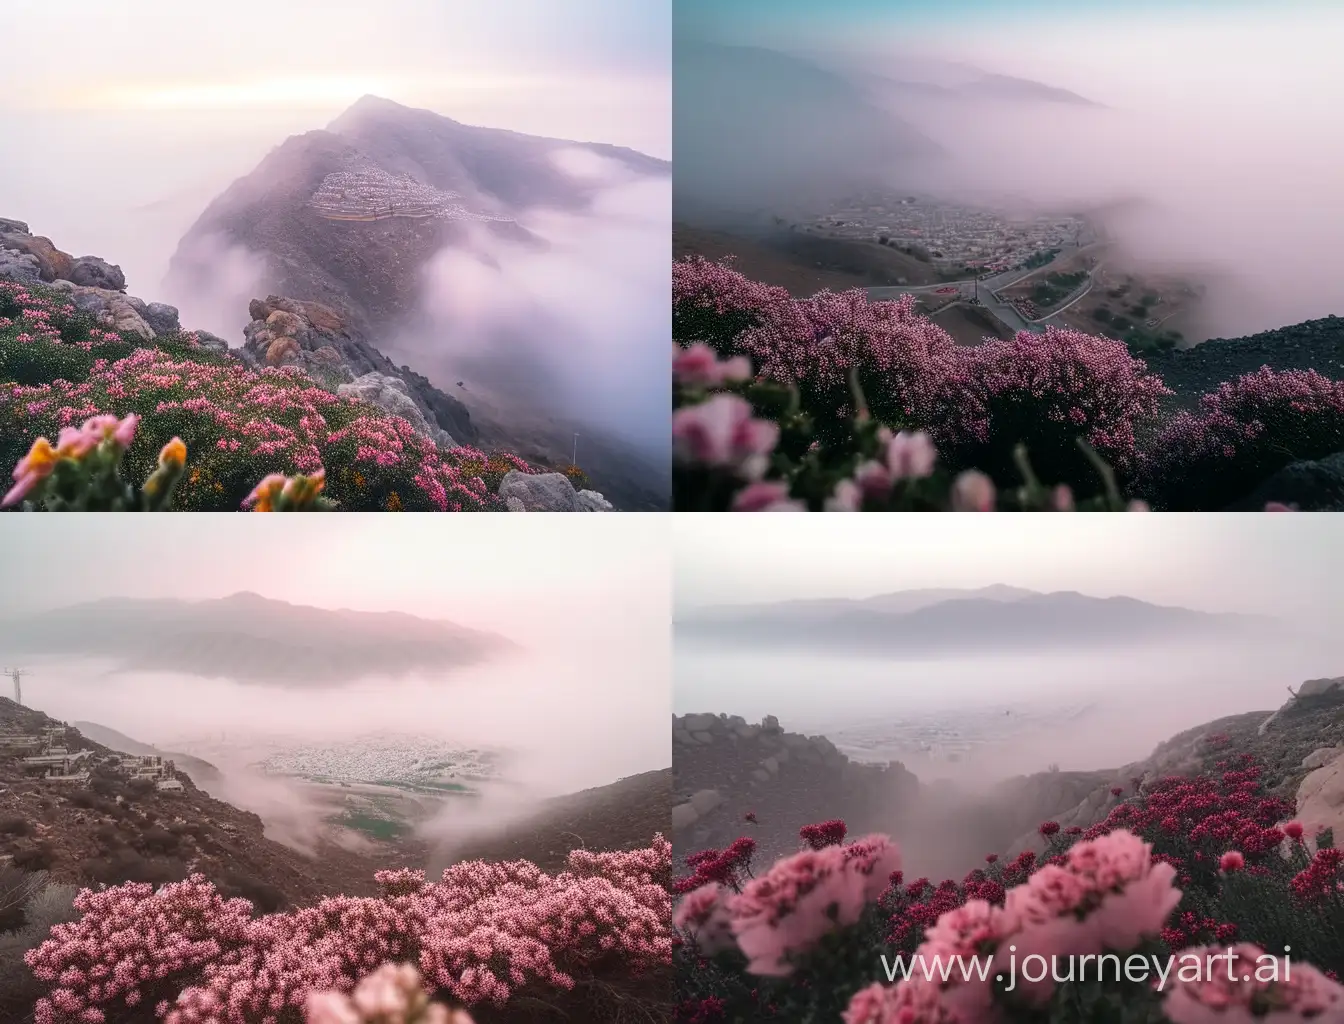 Misty-Taif-Mountains-and-Blossoming-Rose-Fields-Breathtaking-Landscape-in-Saudi-Arabia